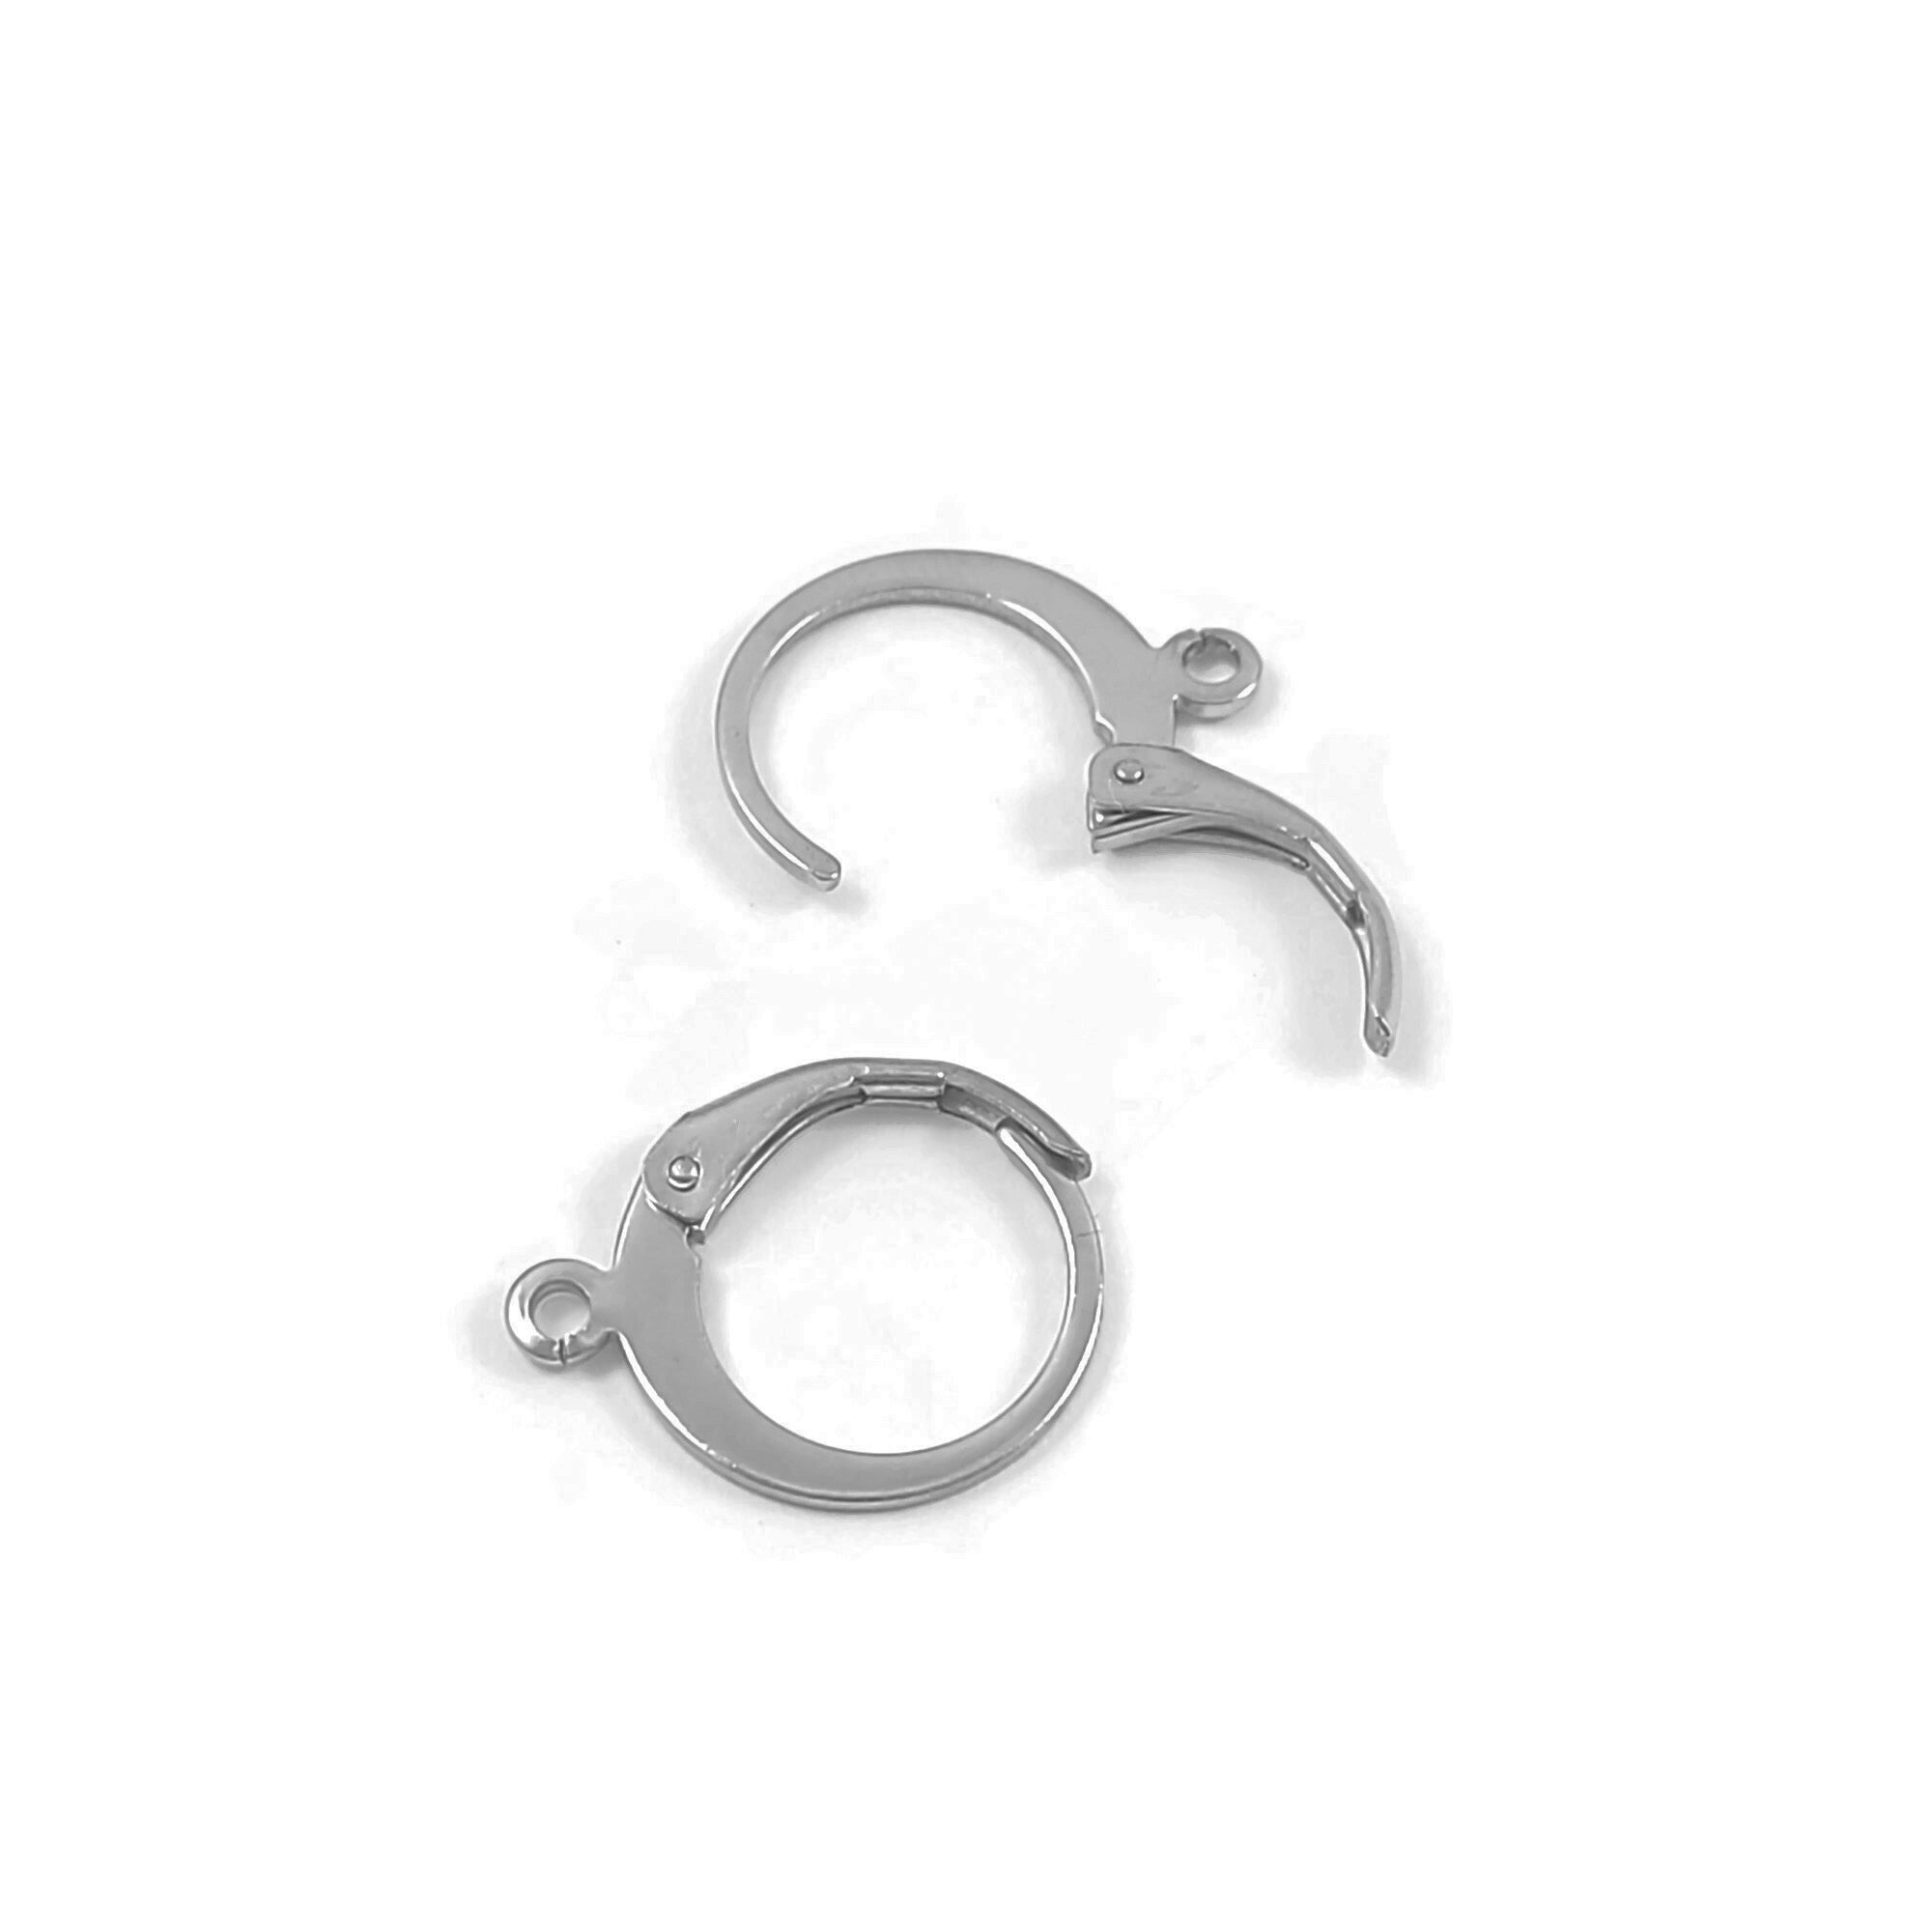 Stainless Round Lever Back Hoop earring hooks 10pcs (5 pairs) Hypoalle